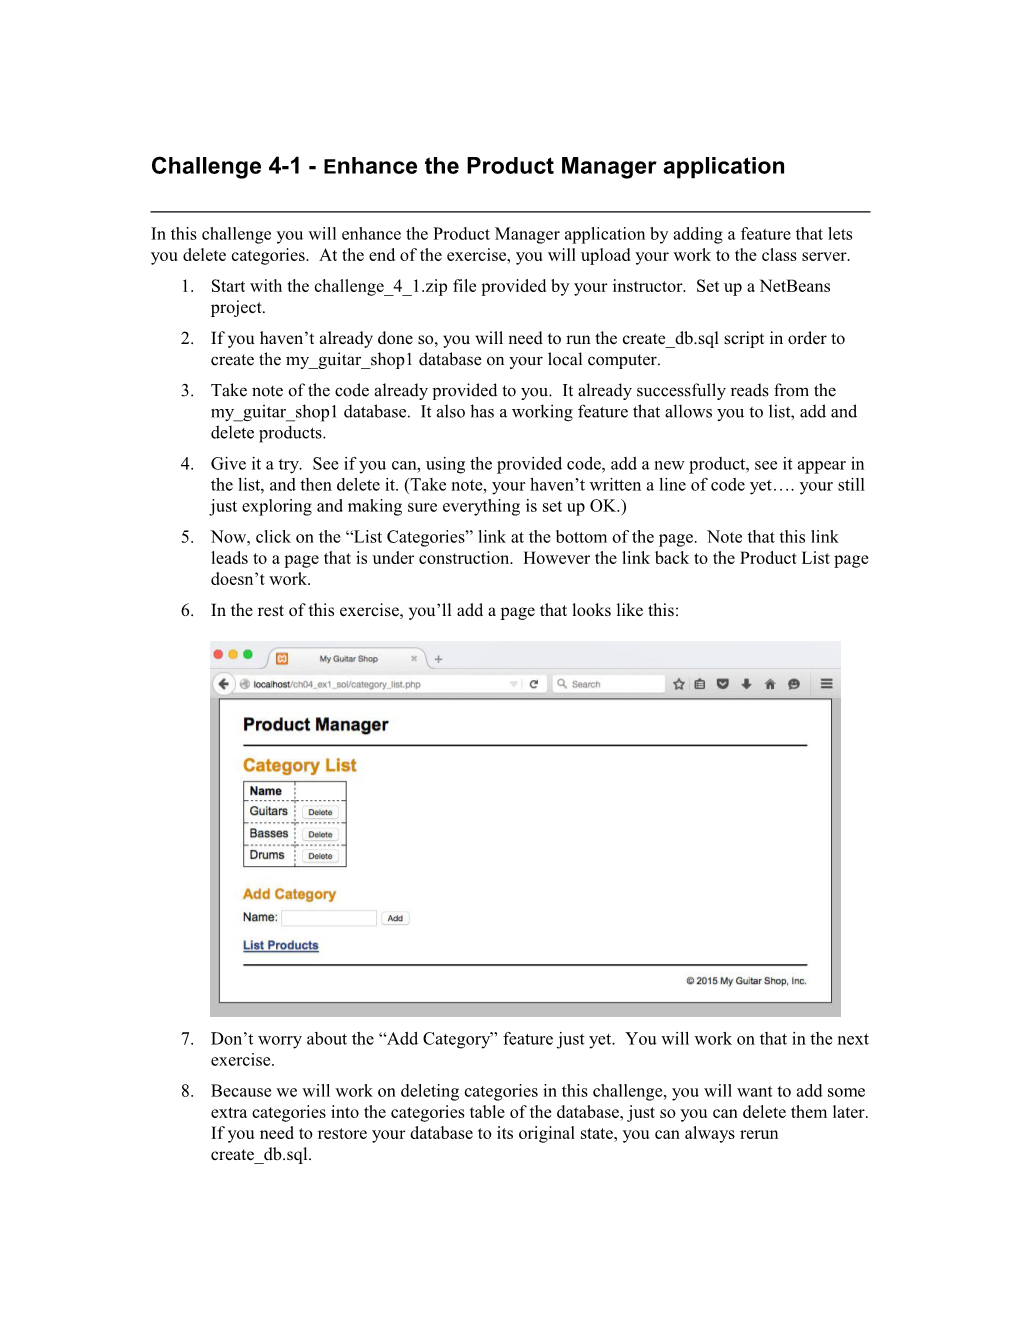 Challenge 4-1 - Enhance the Product Manager Application